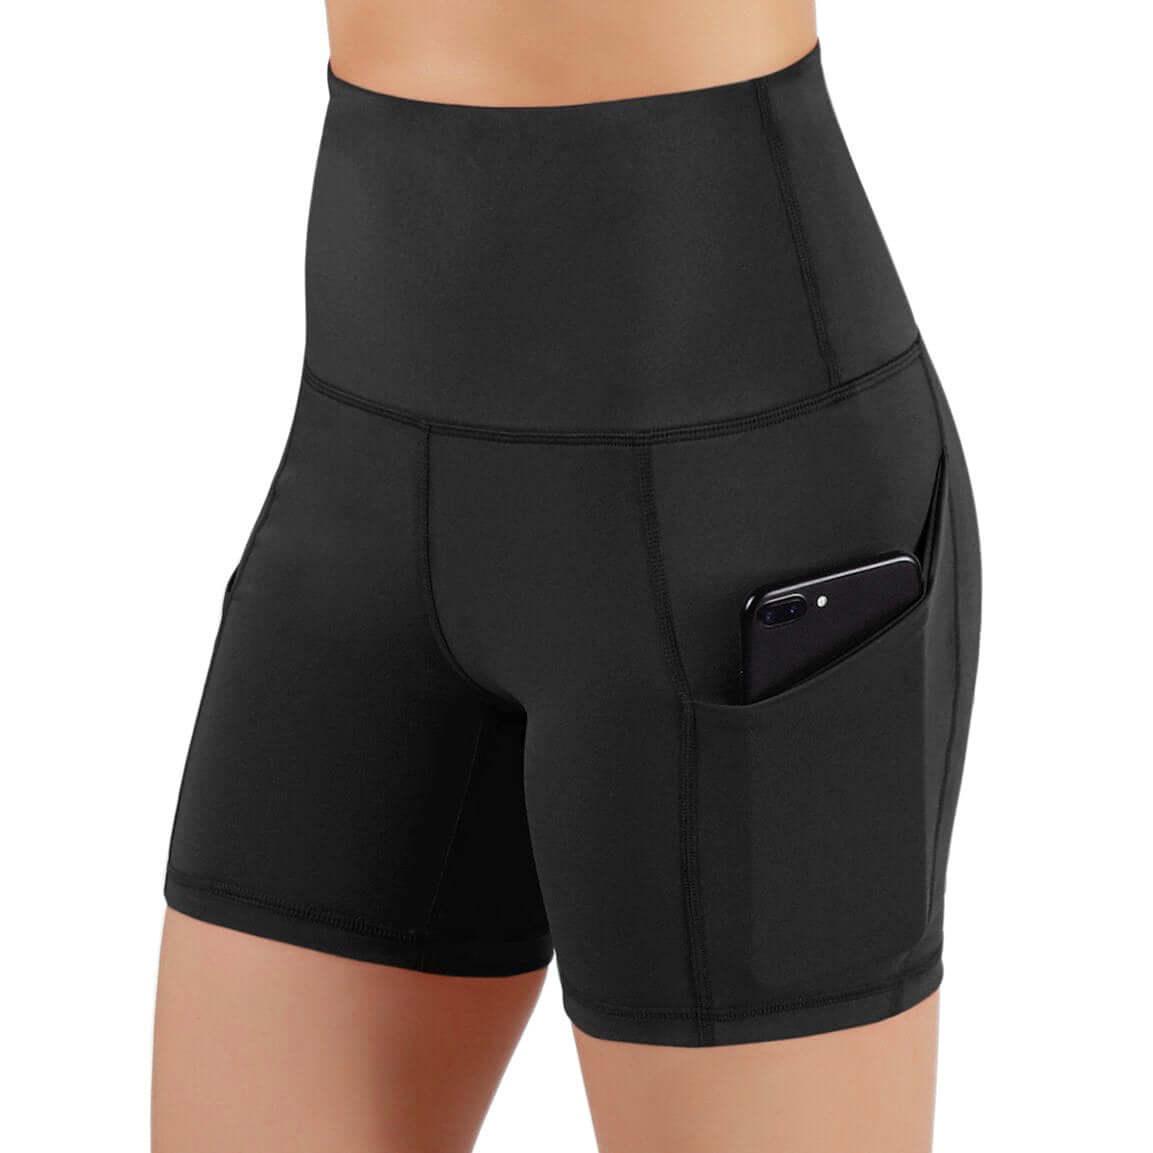 Jolie High-Waisted Athletic Shorts with Hip Pockets - VirtuousWares:Global